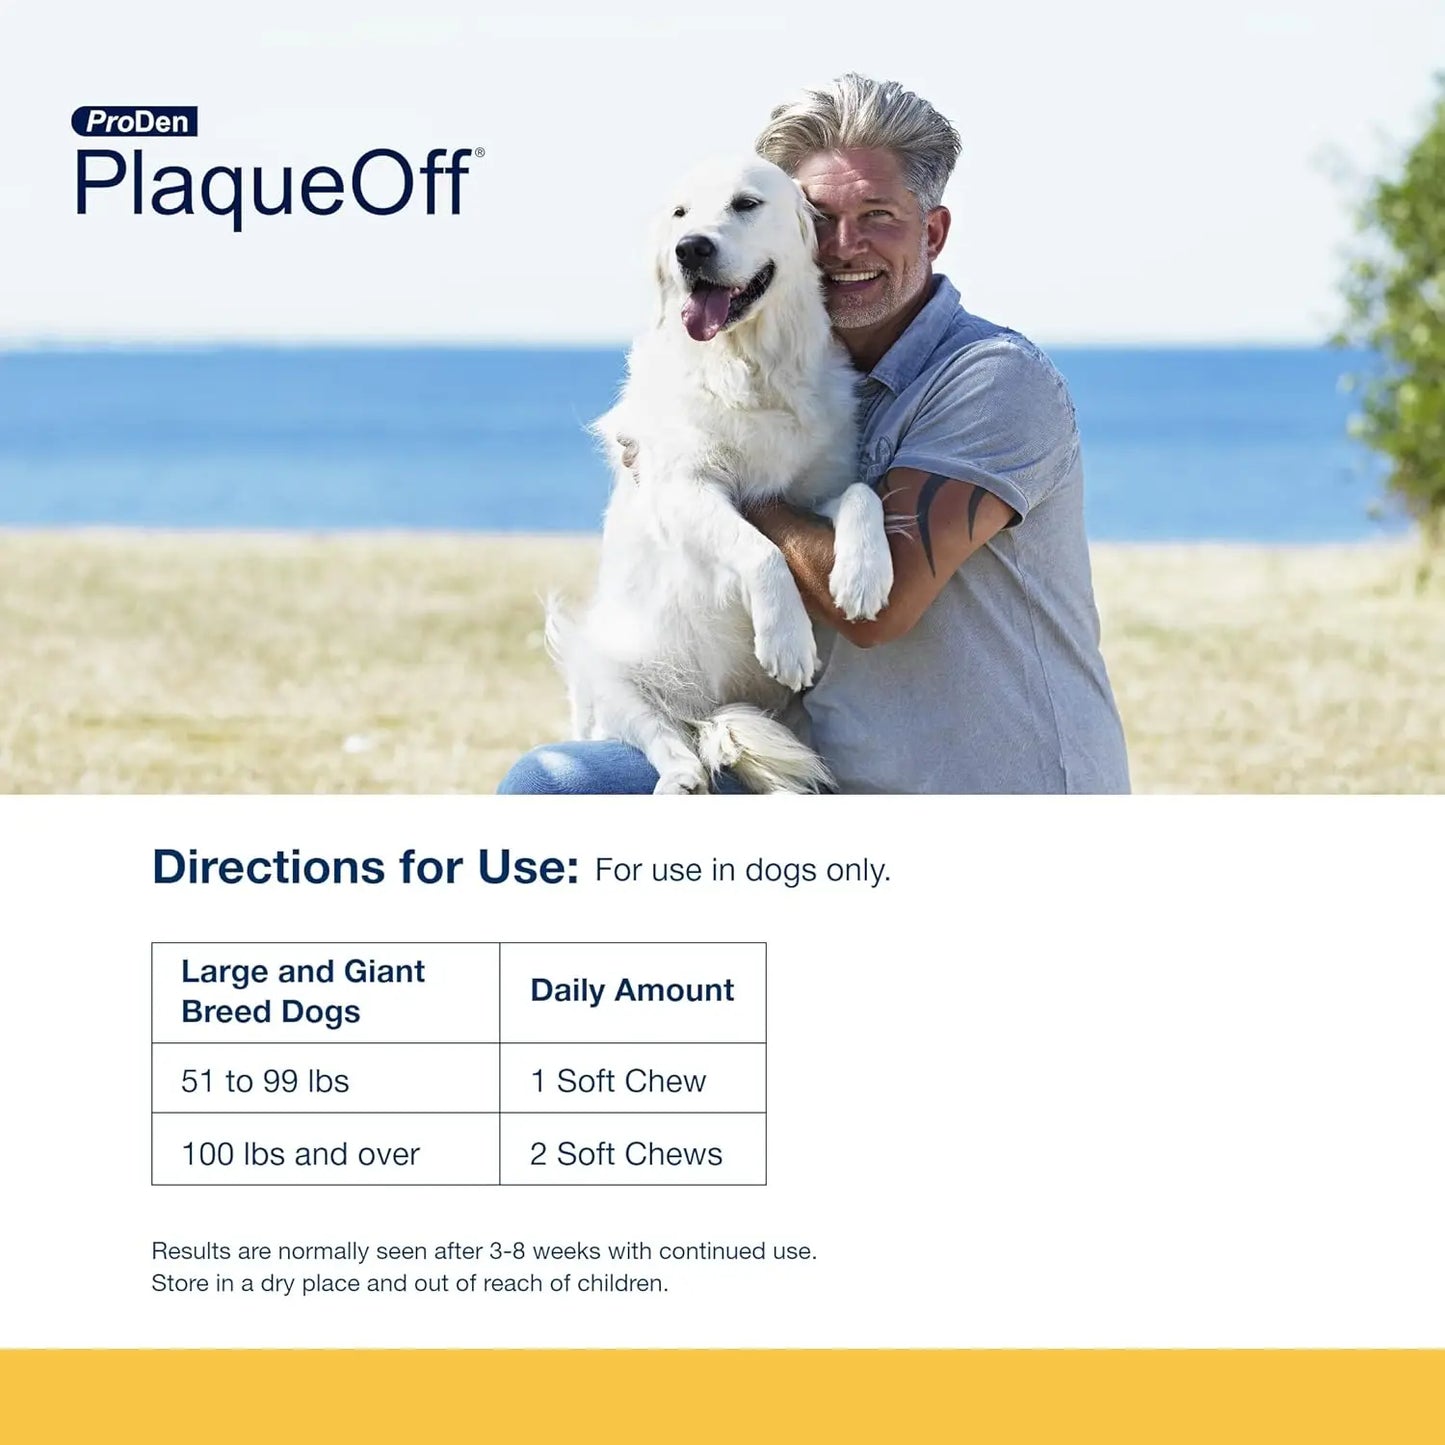 PlaqueOff Soft Chews Large Breed Dogs PlaqueOff